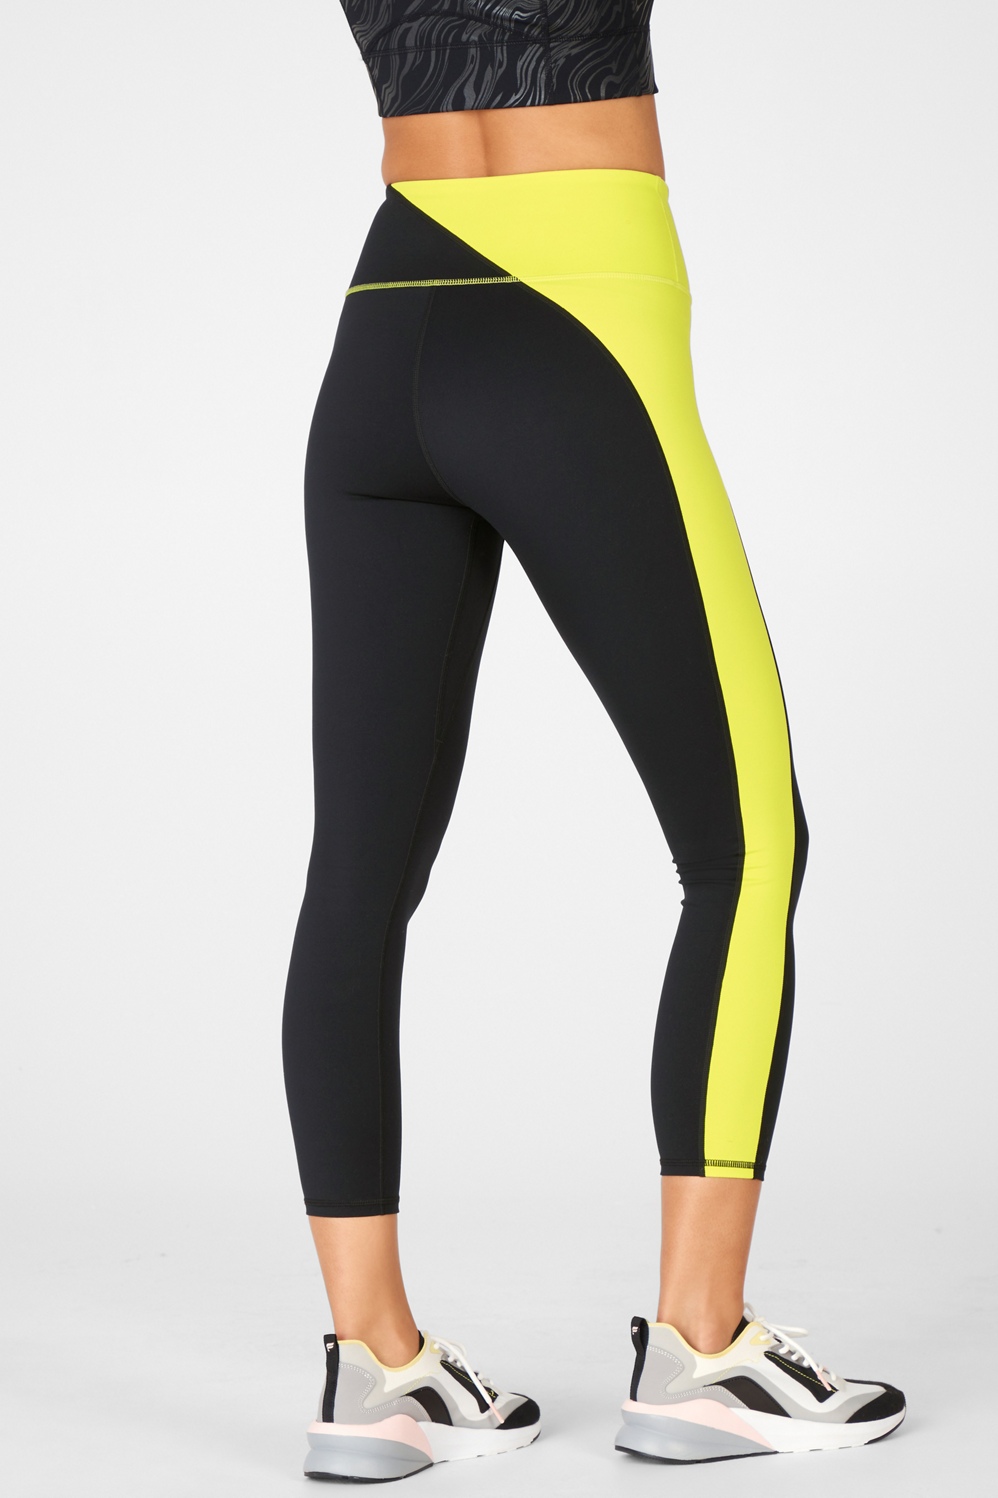 Exotic Women Fabletics Leggings With Hidden Zipper Perfect For Outdoor  Activities And Delayed Wear Large Size Available From Xiaobaica, $32.53